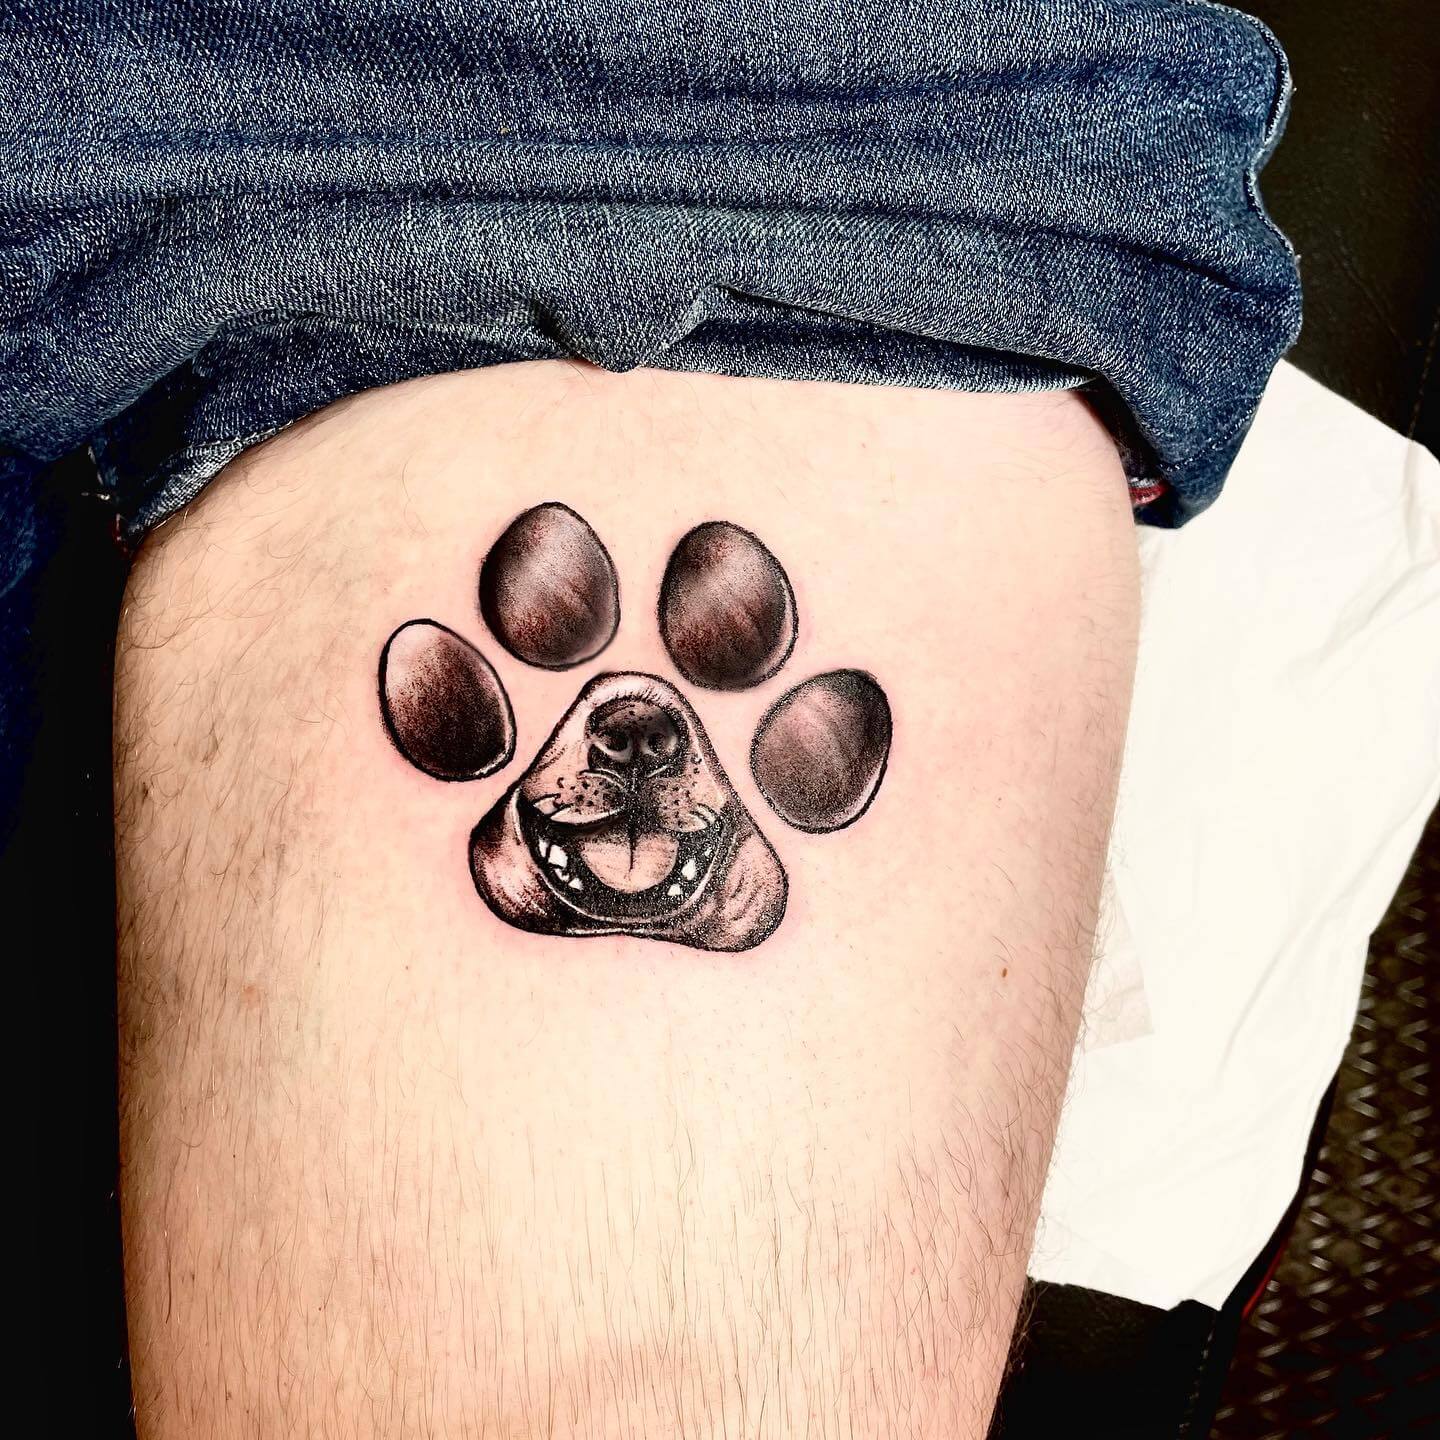 Best tattoo ideas to commemorate your dog | Kabo